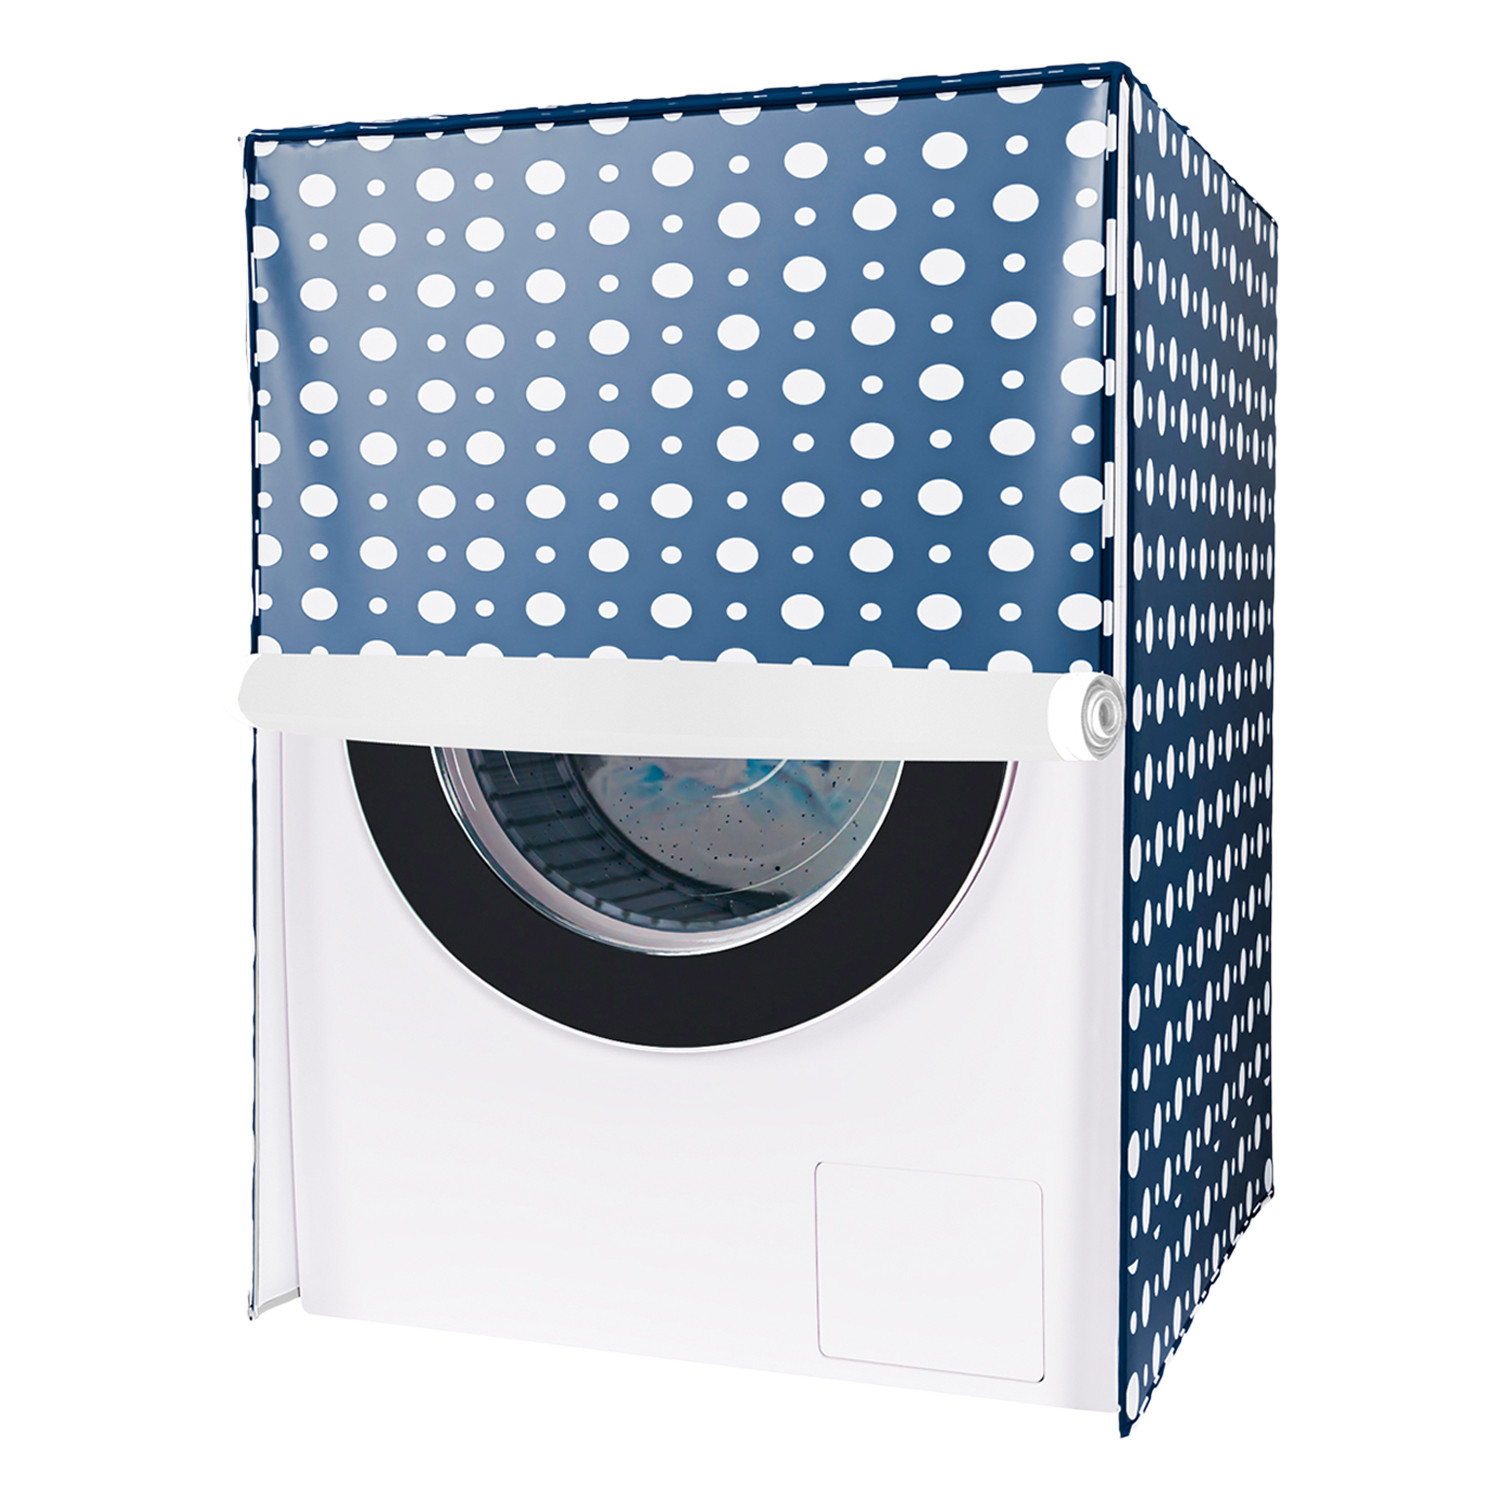 Kuber Industries Washing Machine Cover | Dot Print Washing Machine Cover | PVC | Front Load Washing Machine Cover | Blue